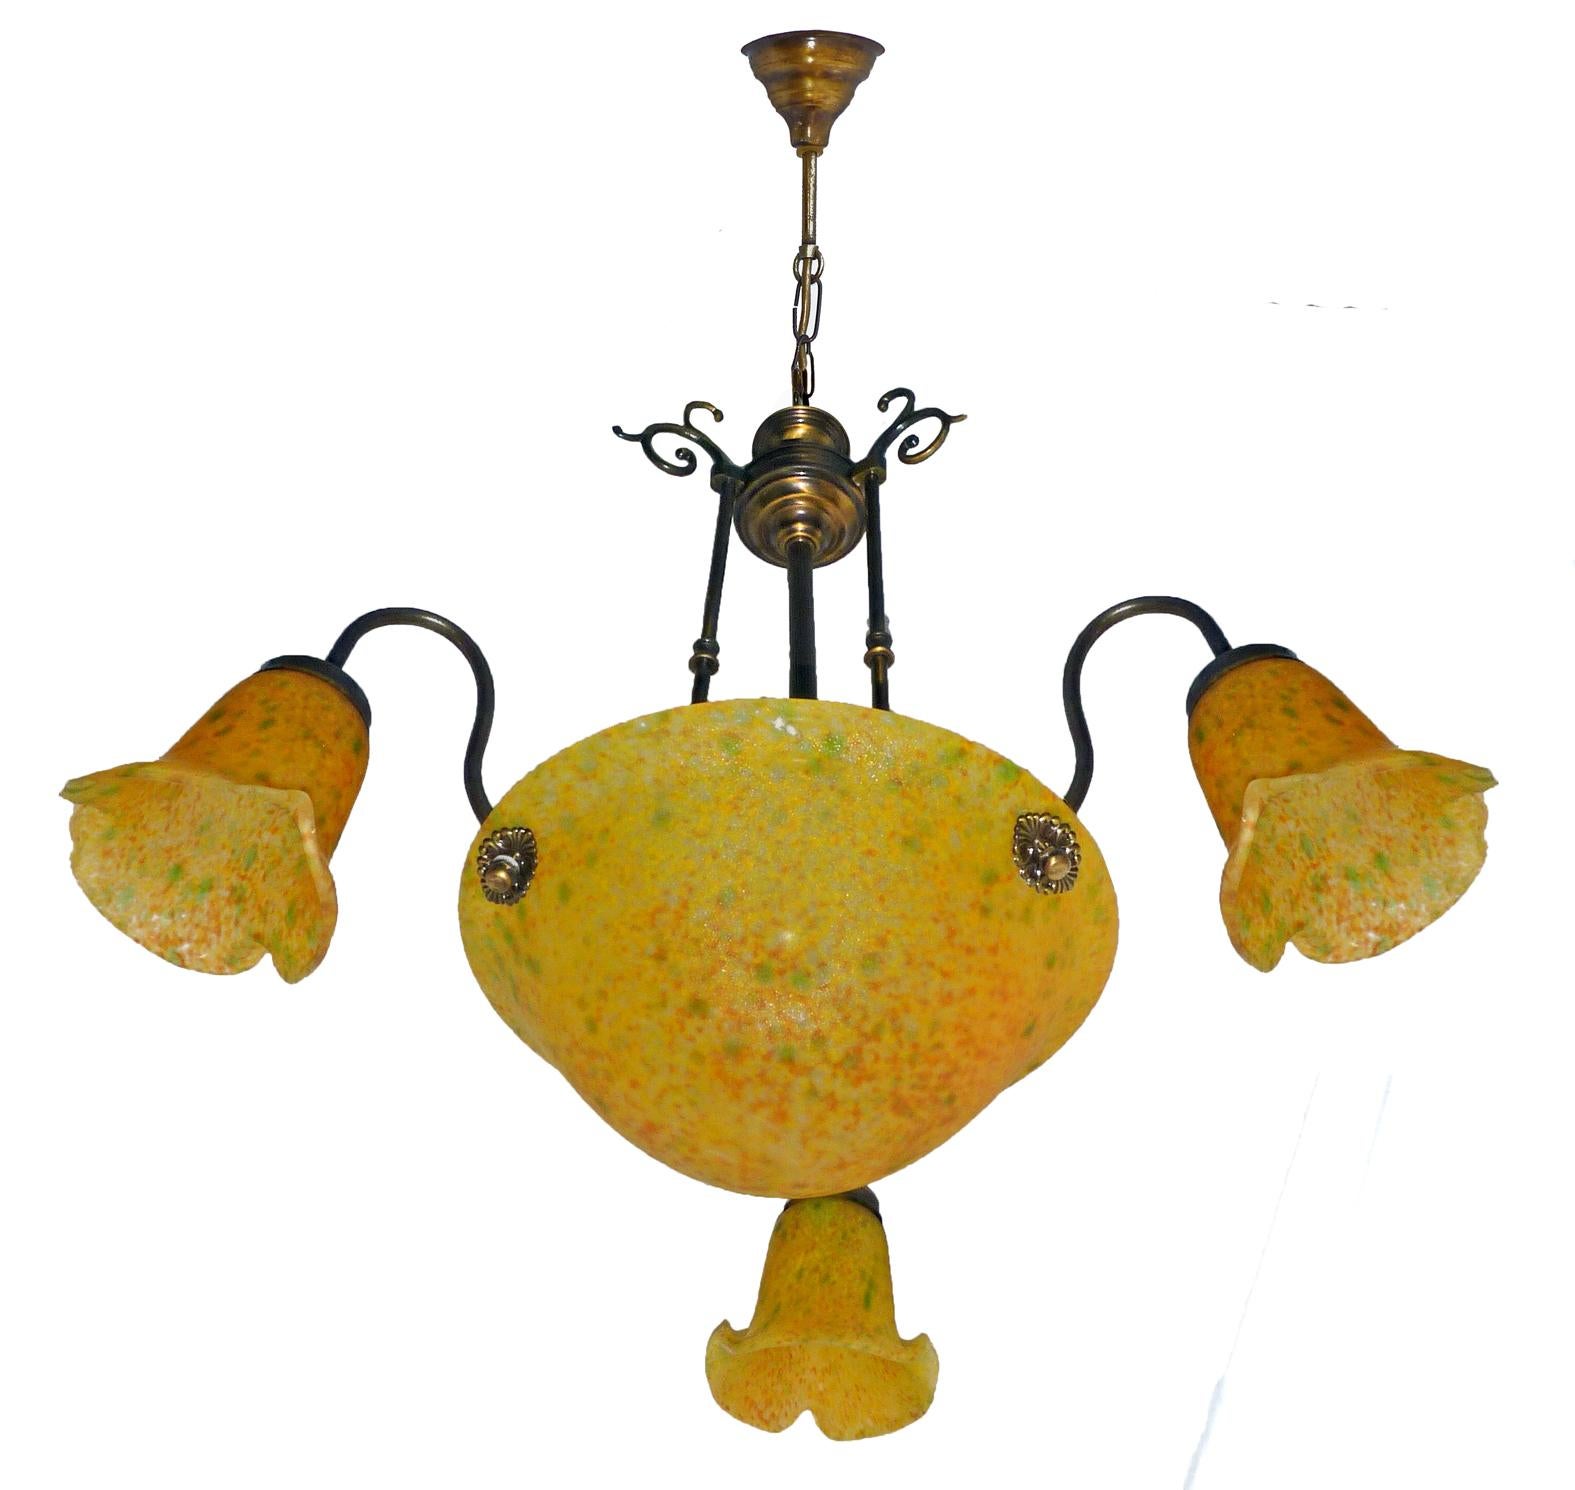 20th Century French Art Deco and Art Nouveau Polychrome Amber Glass 4-Light Chandelier For Sale